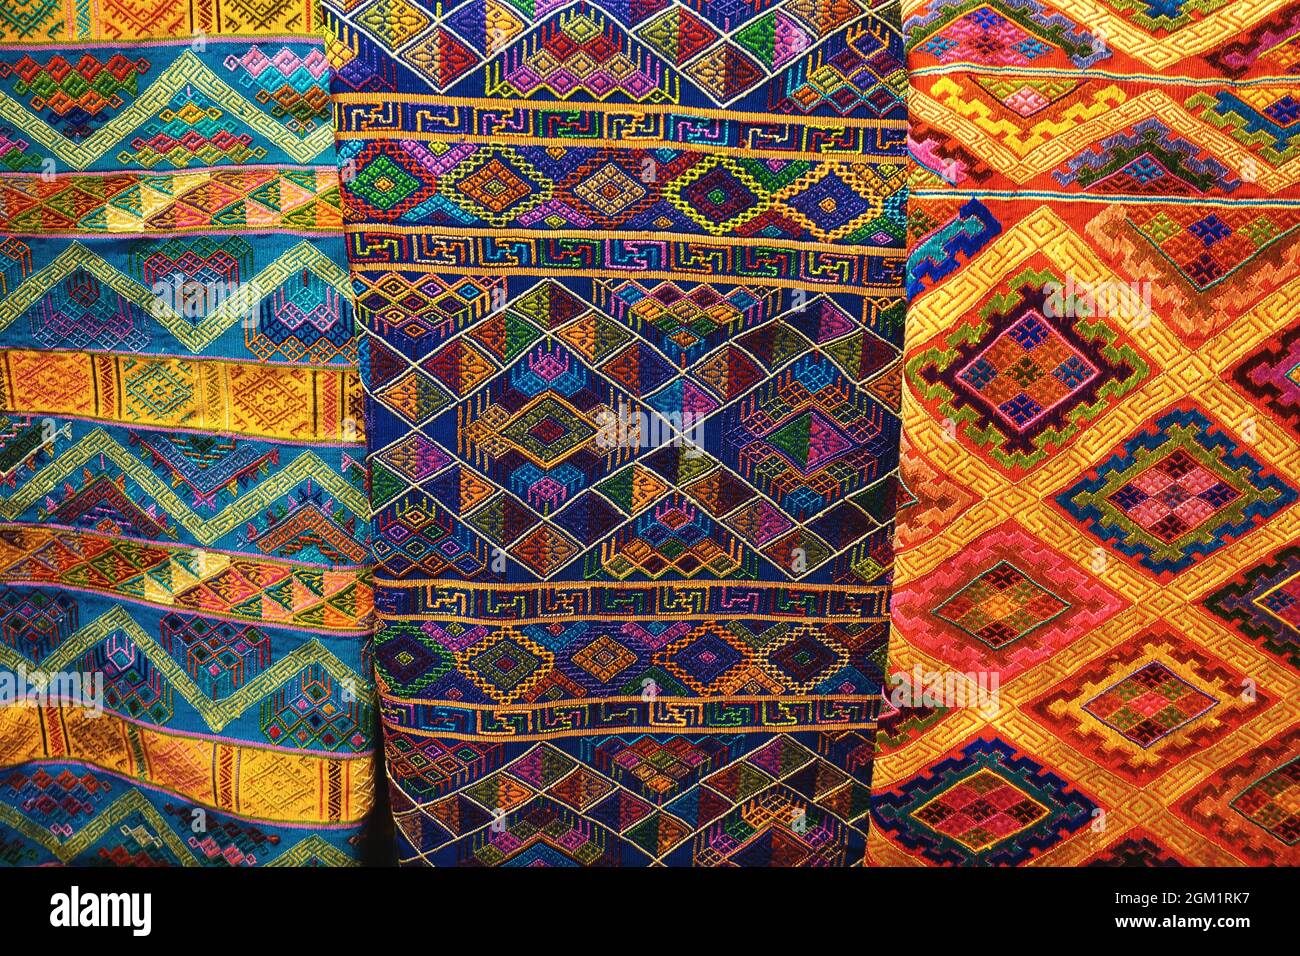 Colorful assortment of beautiful Bhutanese textiles with traditional intricate handwoven and embroidered patterns on display in Thimphu, Bhutan. Stock Photo